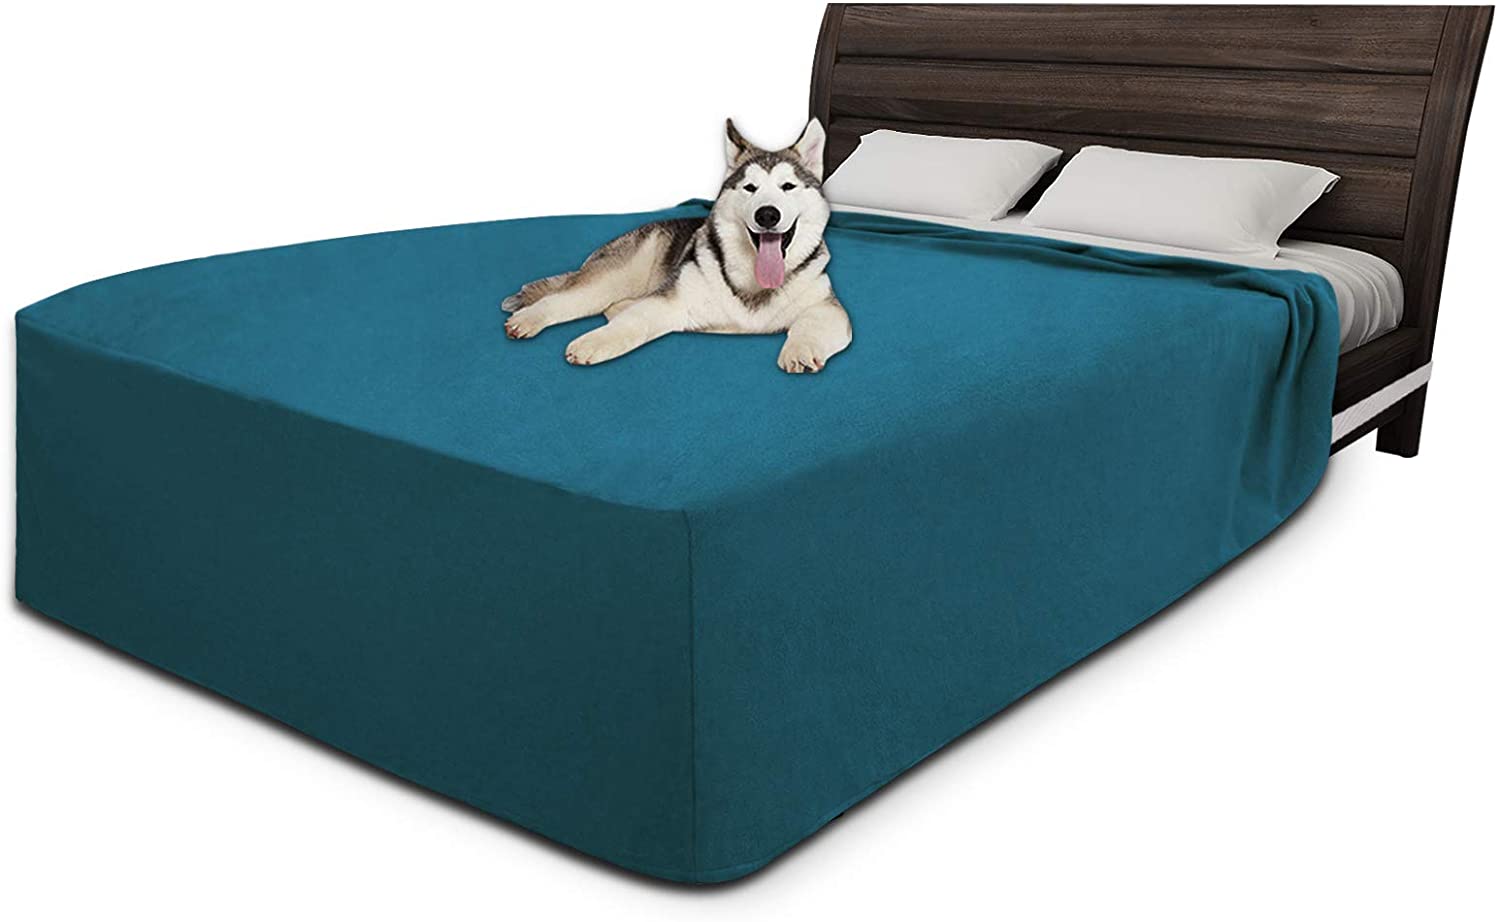 Easy-Going 100% Waterproof Fleece Bed Cover Washable Furniture Protector Cover Soft and Comfortable Fabric Reusable Incontinence Bed Under Pads for Pets Kids Children Dog Cat 